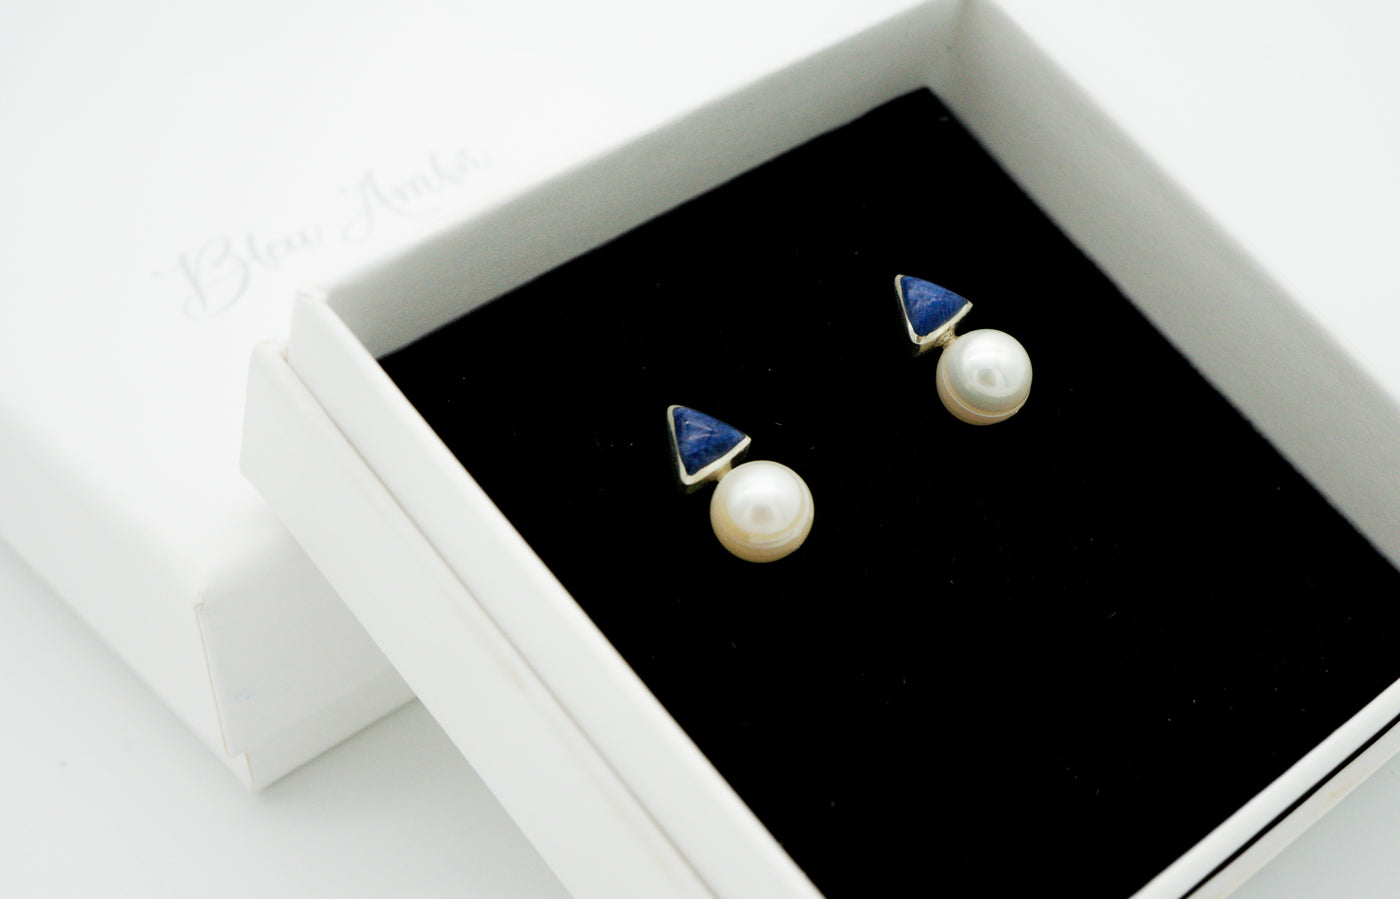 BA delicate pearl and lapis lazuli earrings sterling silver. Reach for a delicate and exquisite earring that plays with lapis lazuli stone and a beautiful pearl.